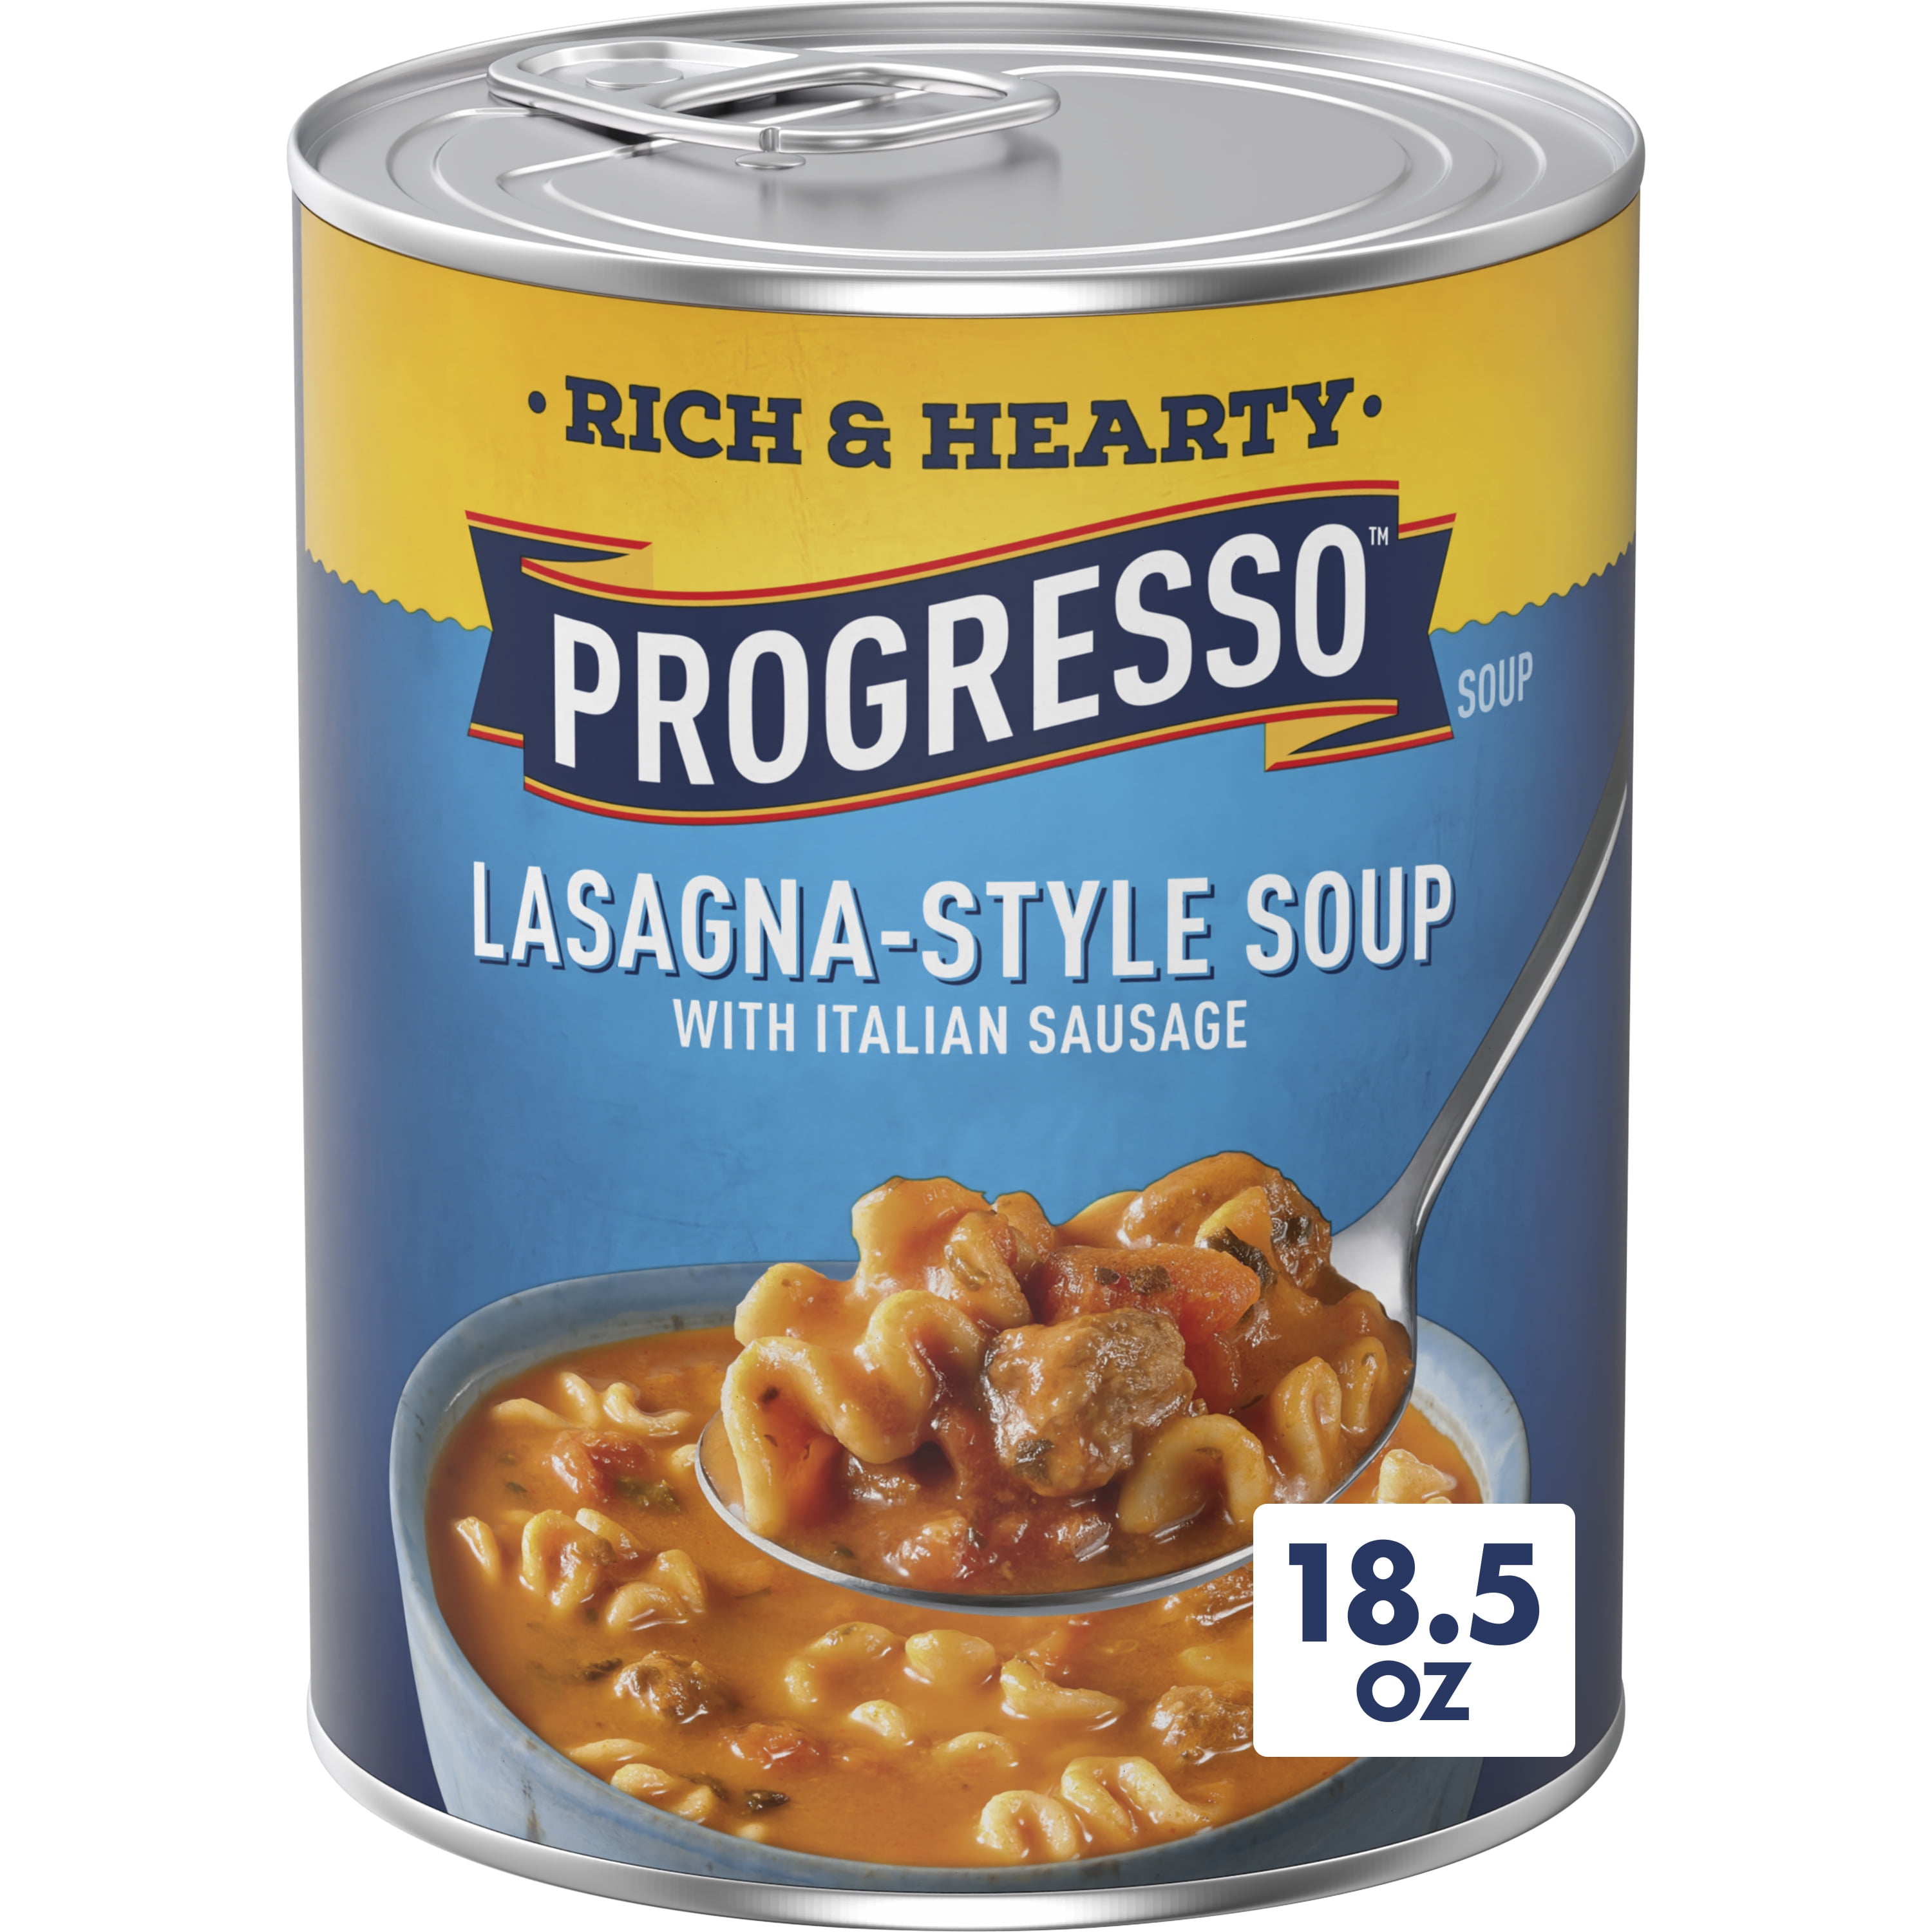 progresso lasagna soup buy 4 get $1 walm cash and pay 1.58 less .25 per can 4 cans $1.33